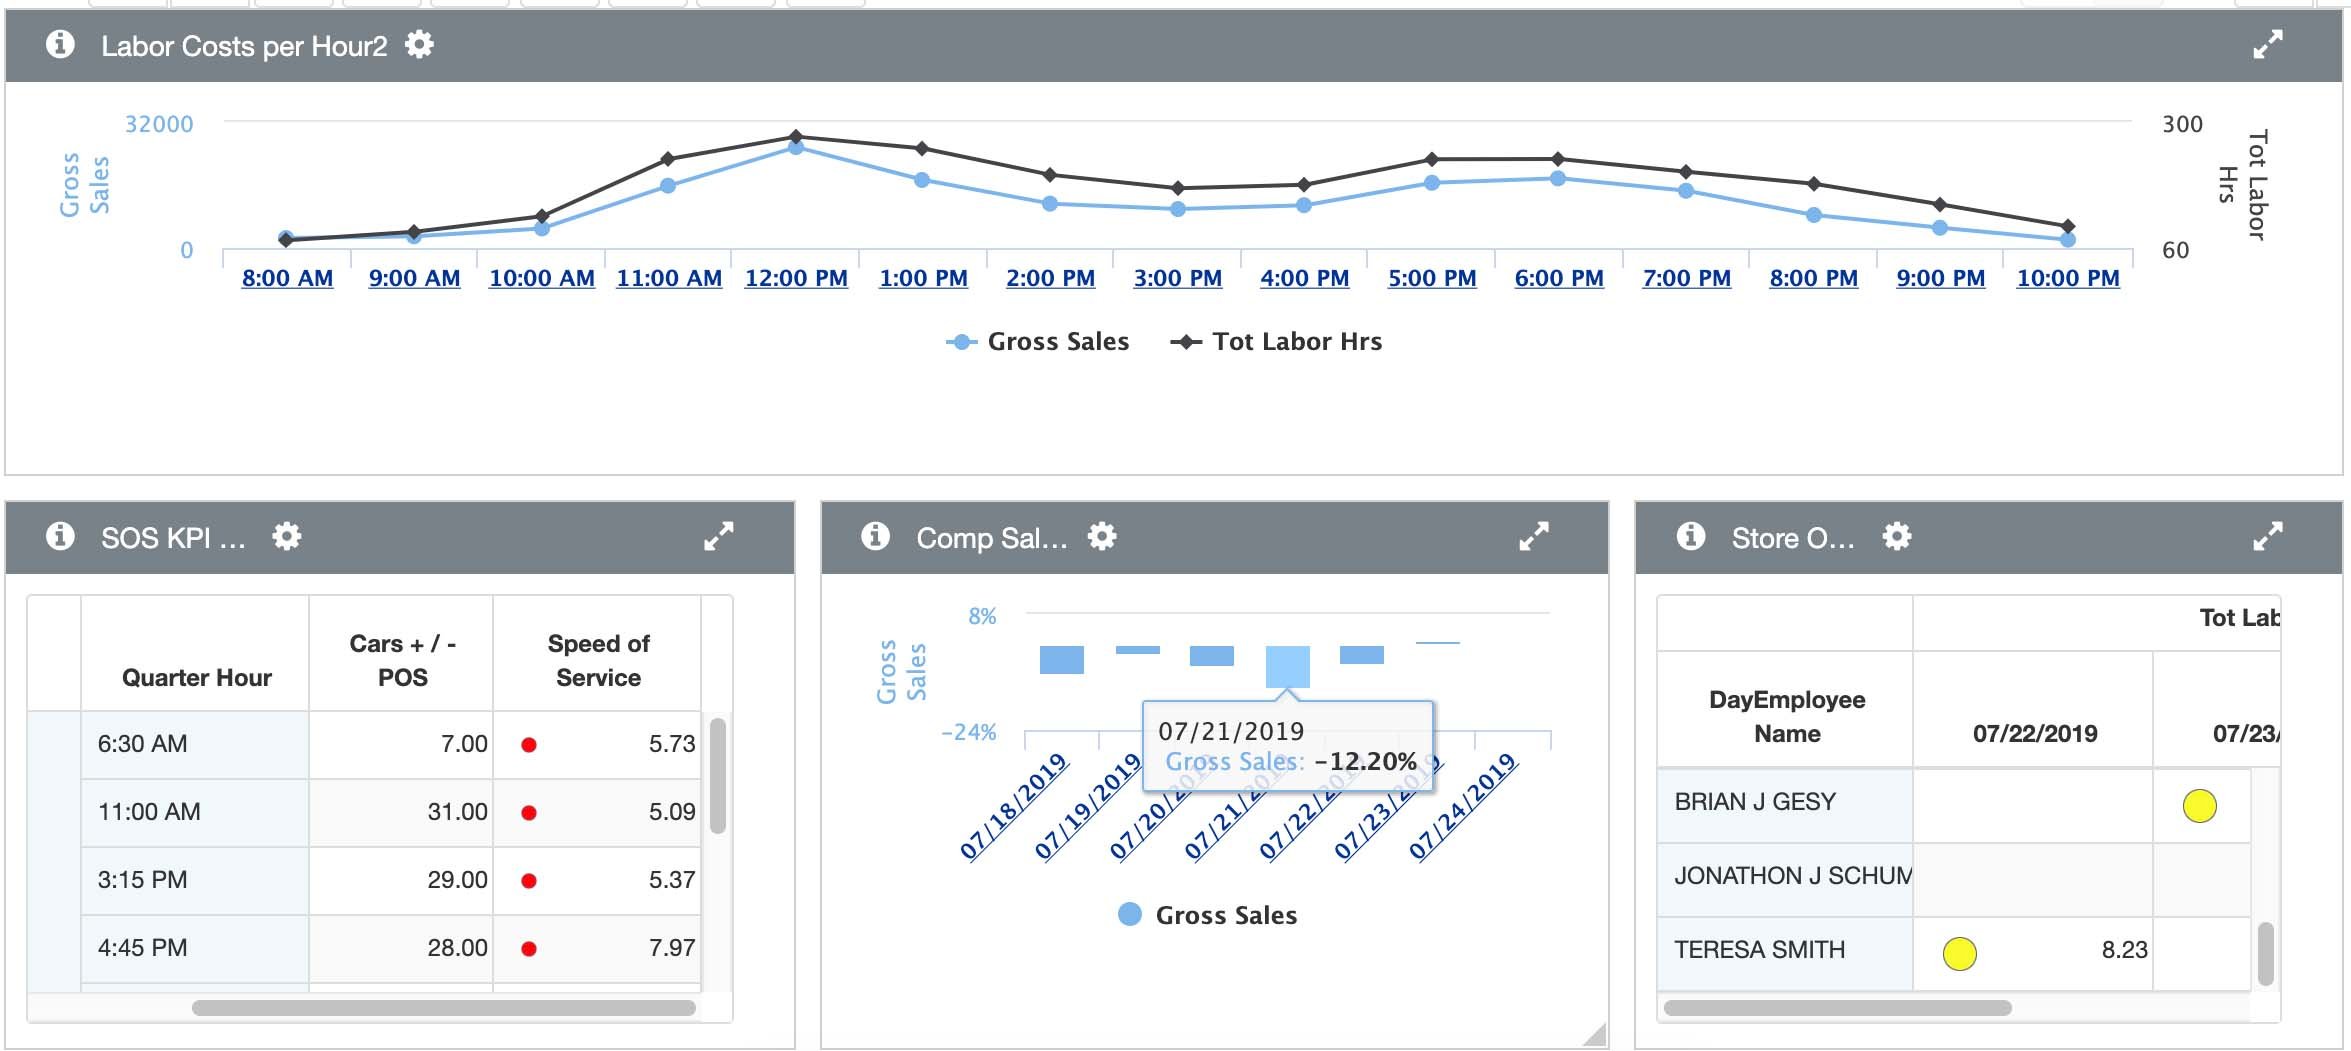 Manager dashboard example